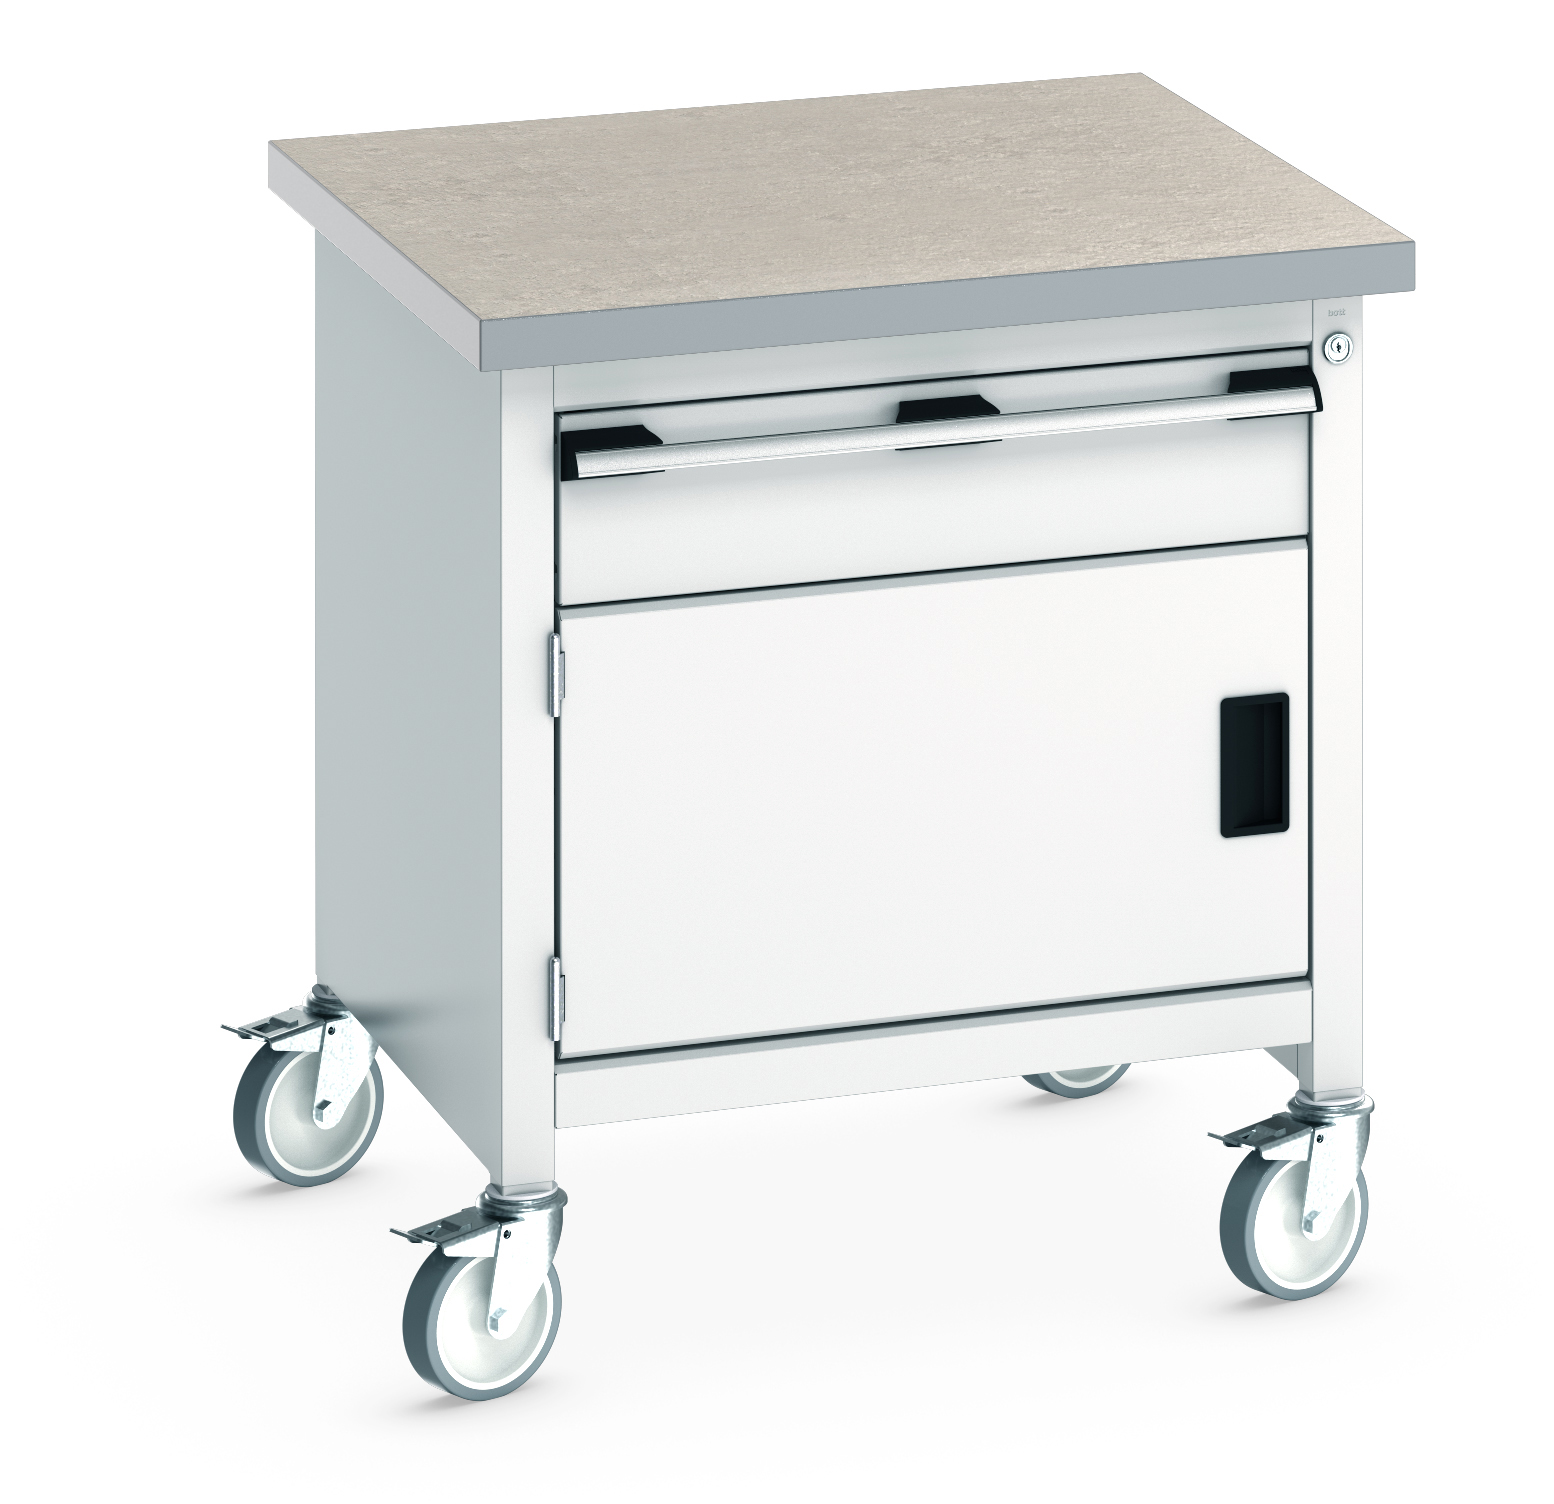 Bott Cubio Mobile Storage Bench With 1 Drawer - Full Cupboard - 41002090.16V